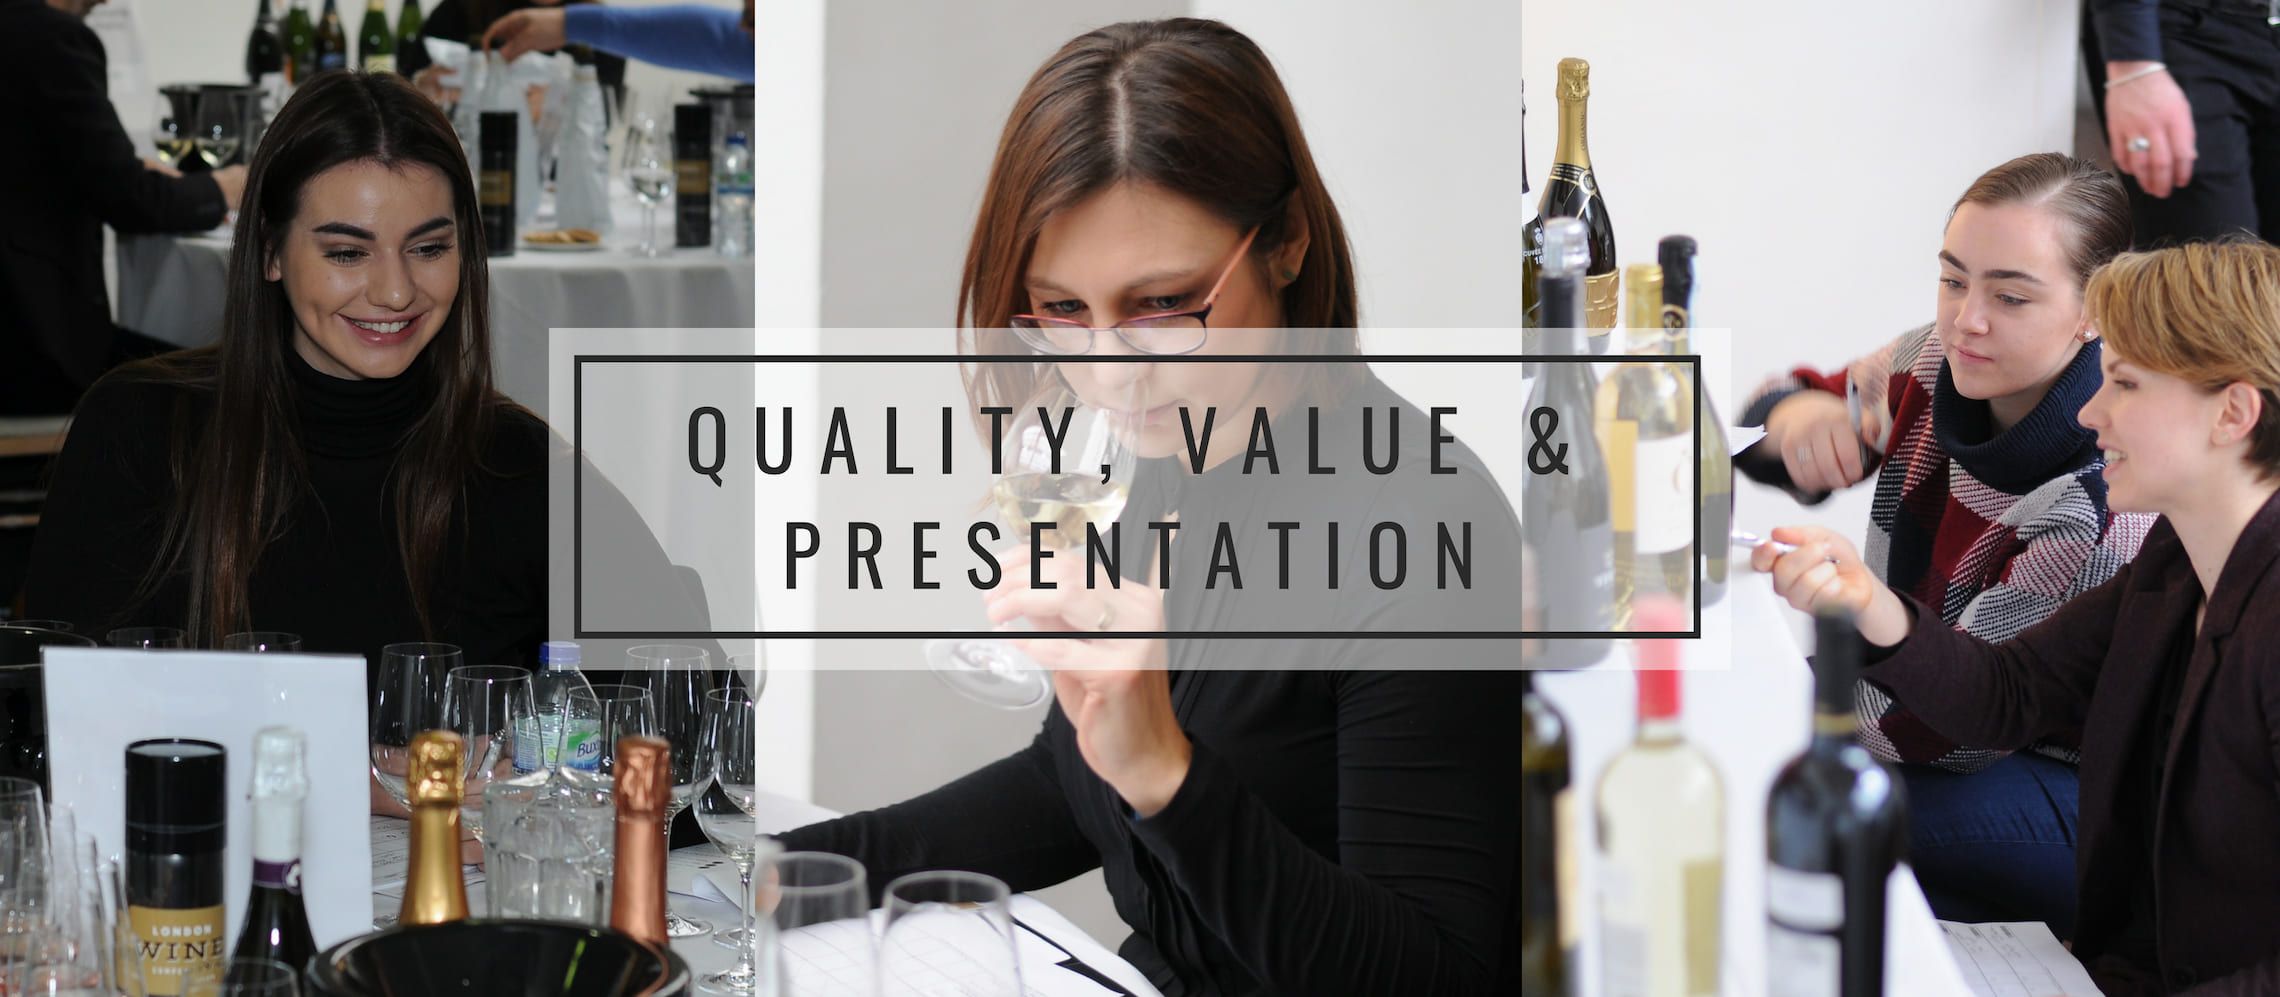 Photo for: London Wine Competition – Showcases Value, Quality and Presentation